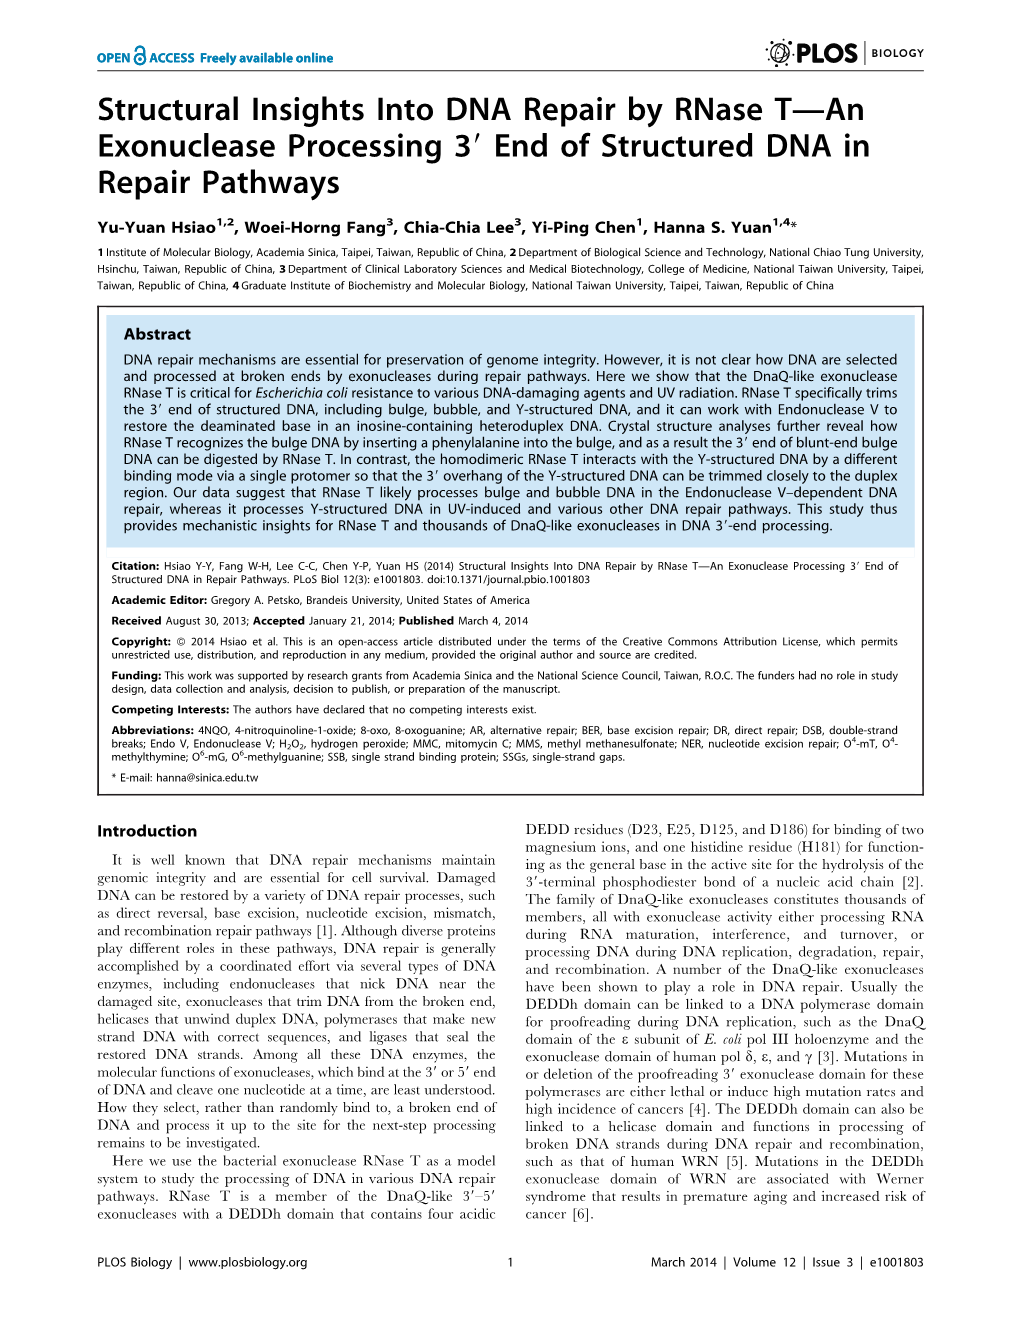 End of Structured DNA in Repair Pathways